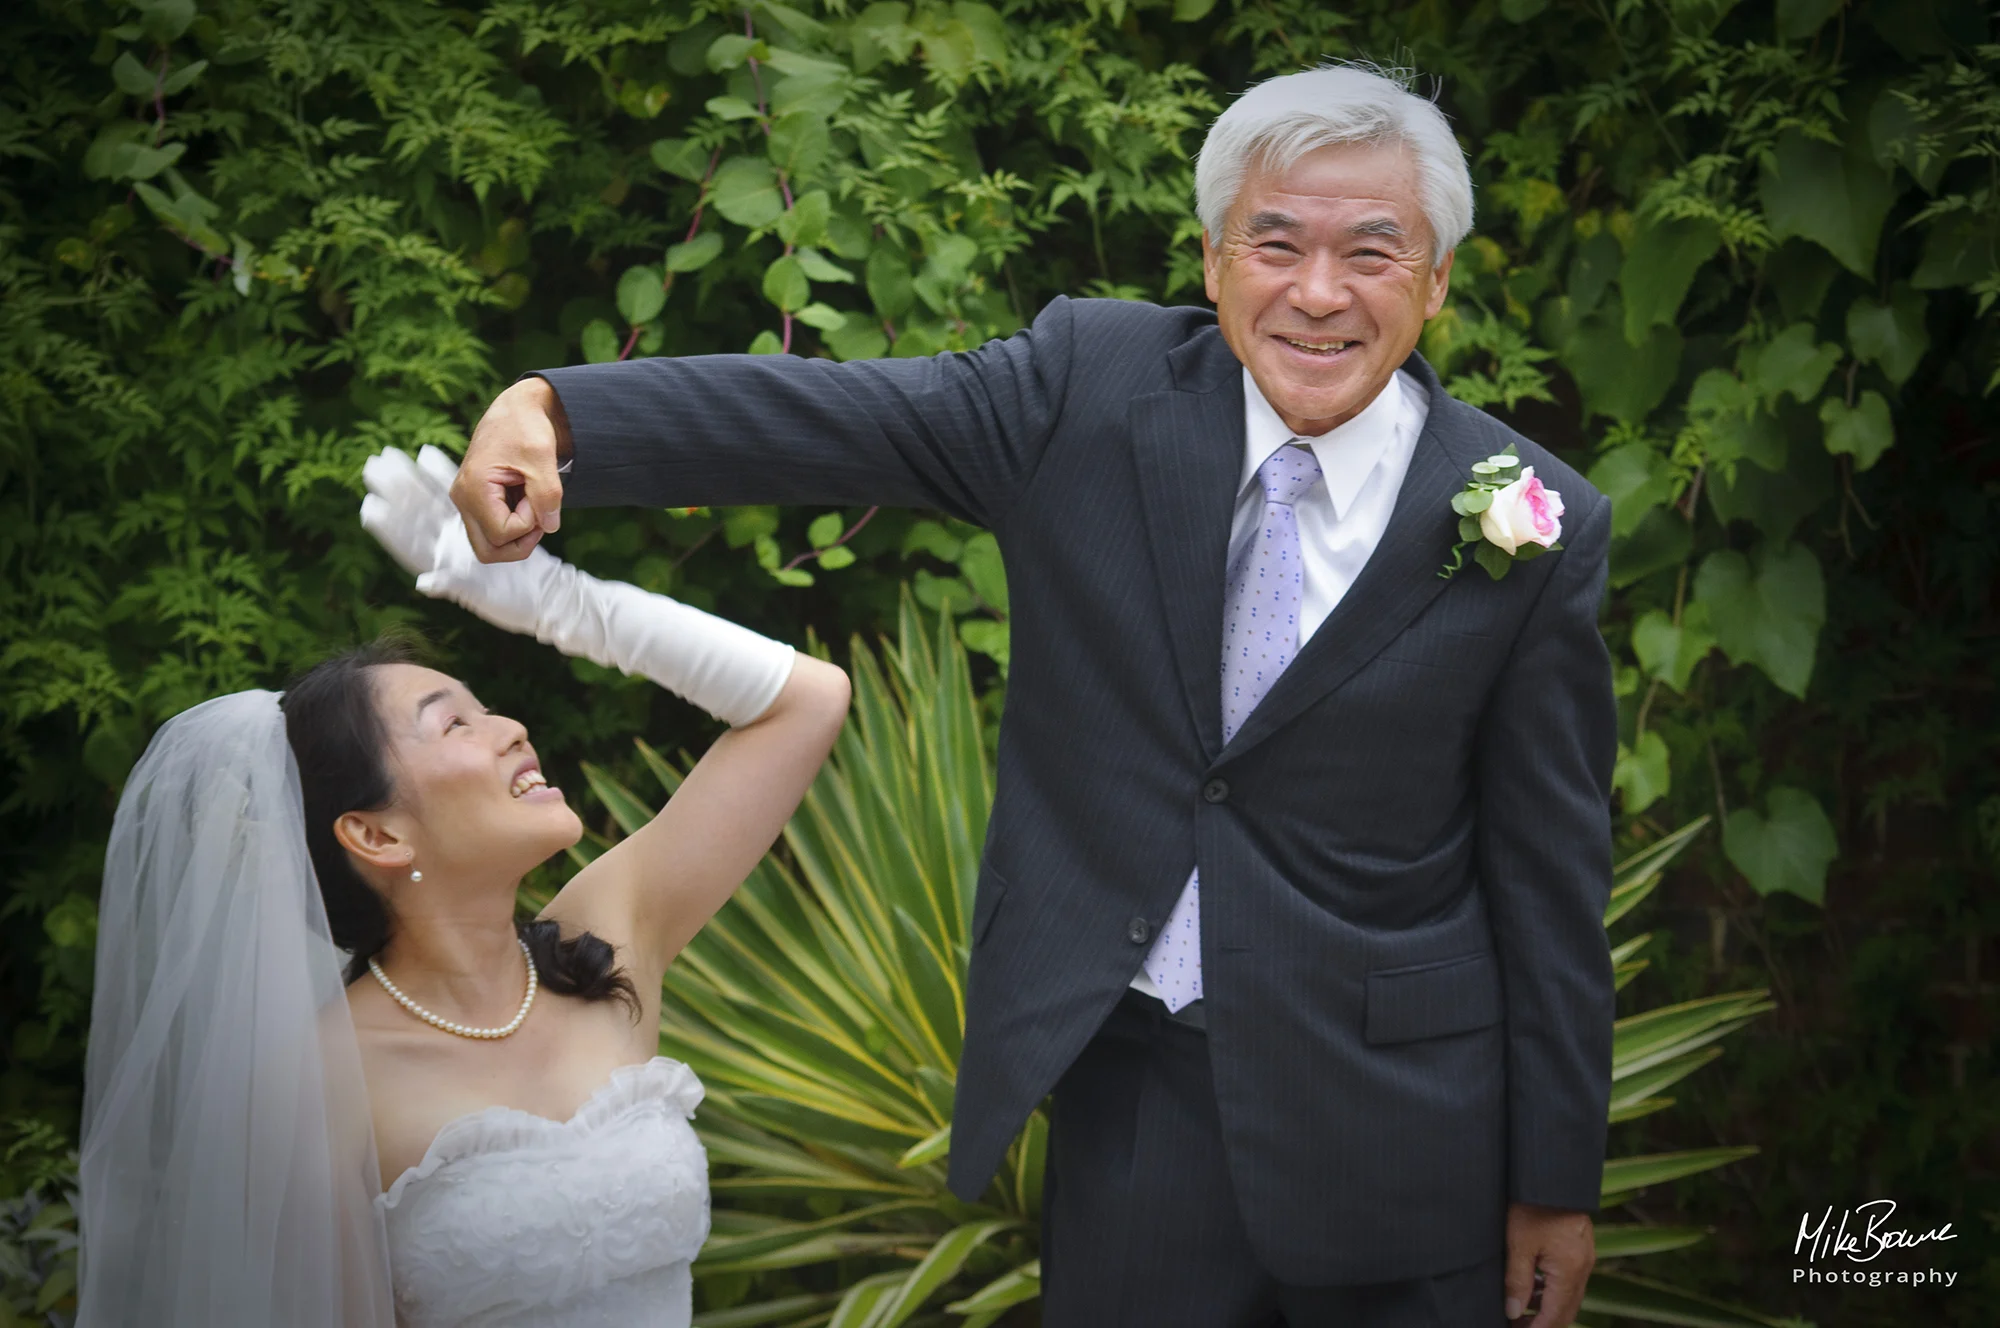 Smiling father of the bride wearing pinstripe suit and pink rose joking with his daughter the Bride